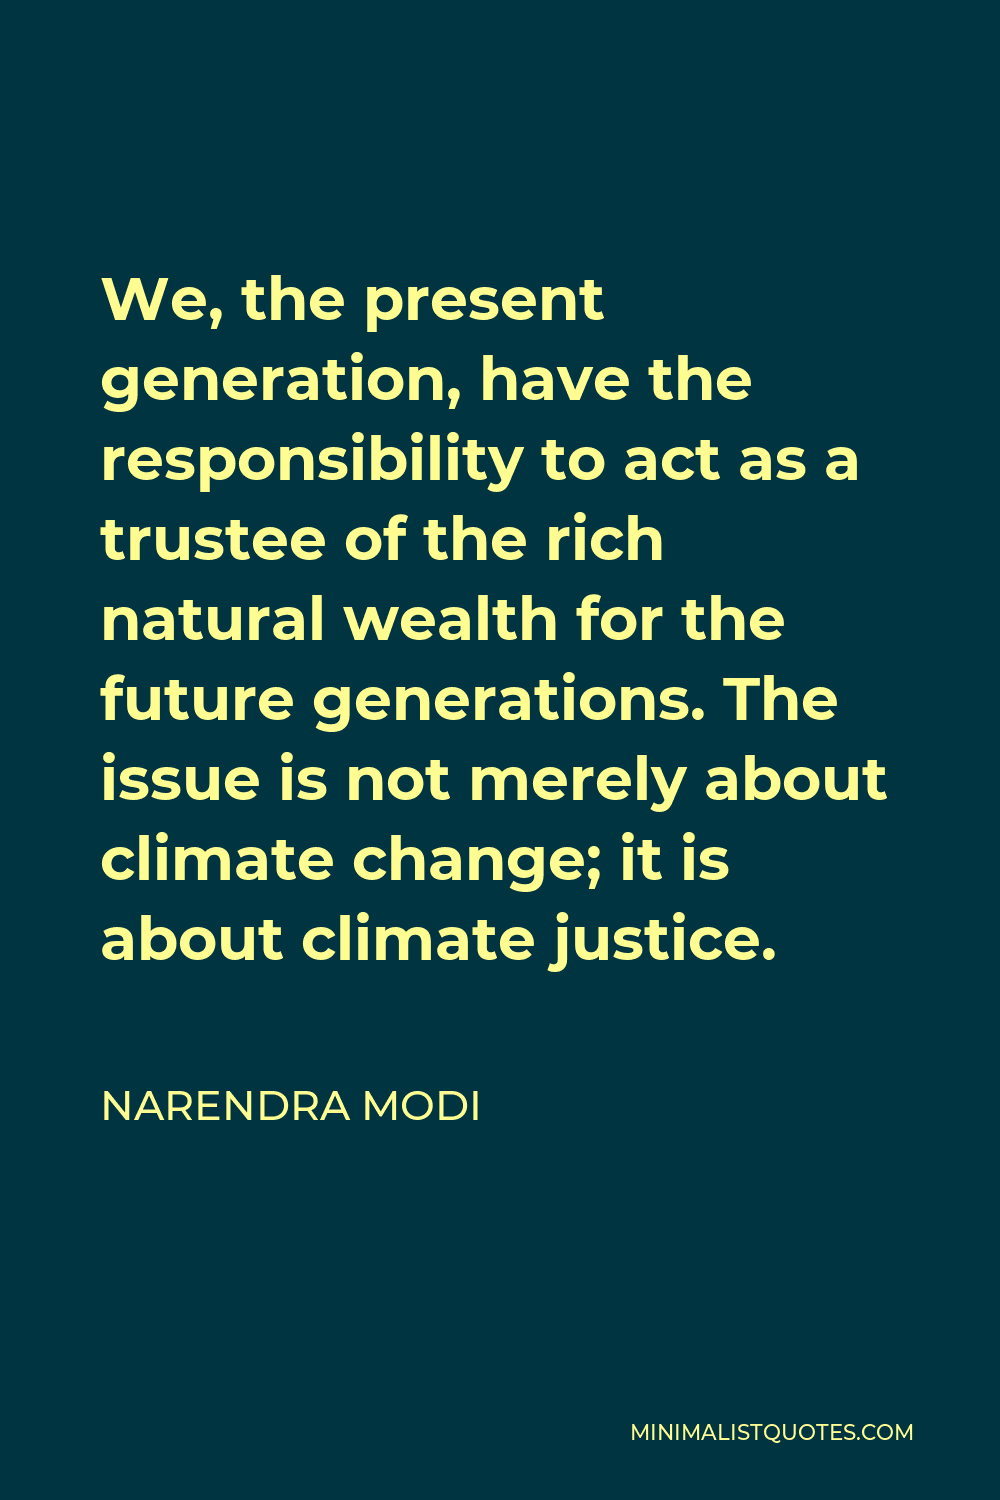 Narendra Modi Quote - We, the present generation, have the responsibility to act as a trustee of the rich natural wealth for the future generations. The issue is not merely about climate change; it is about climate justice.